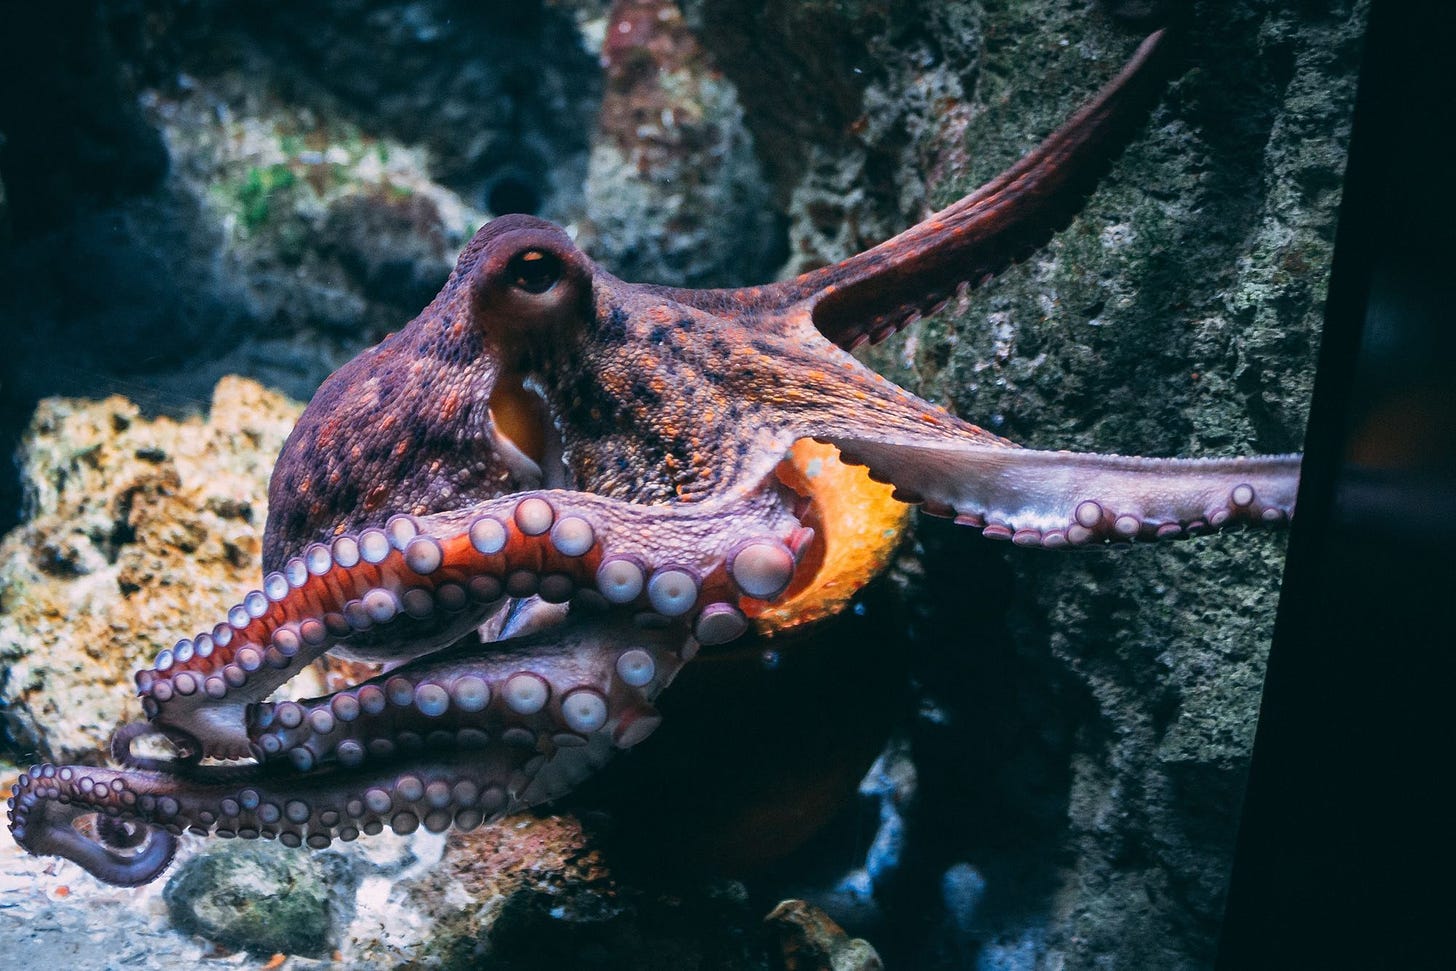 Photo of octopus by Diane Picchiottino of Unsplash